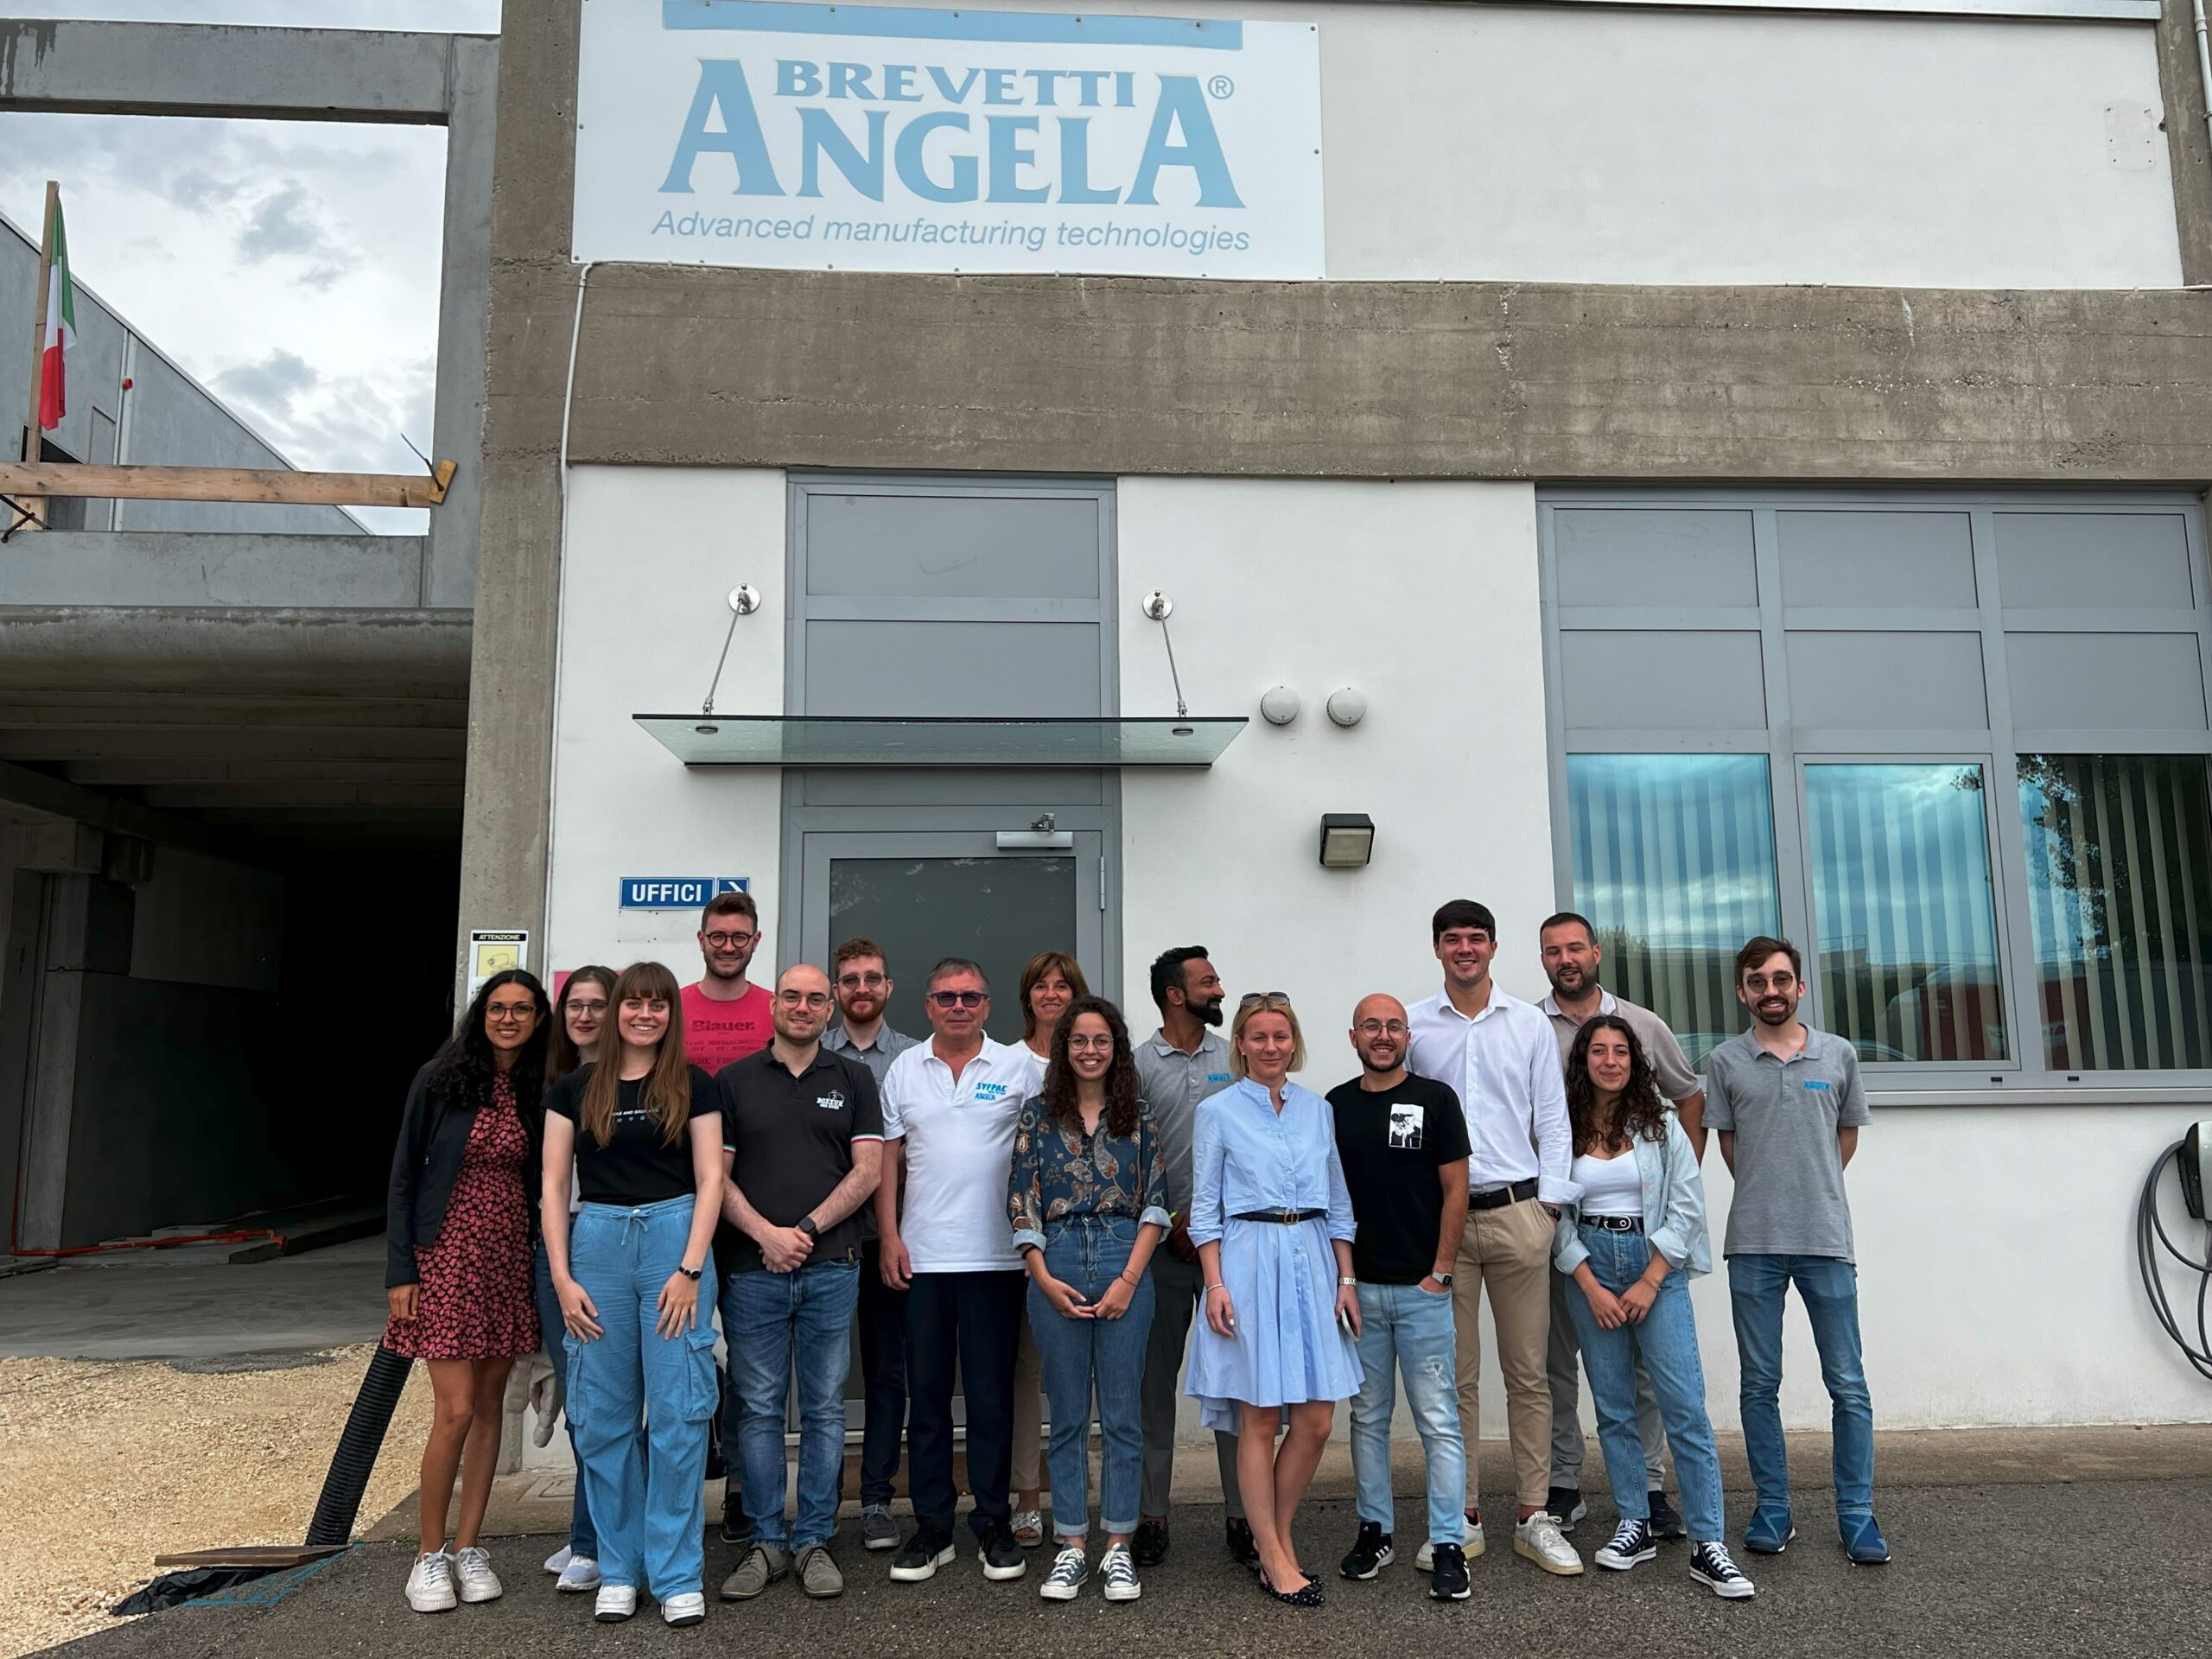 Brevetti Angela welcomes technical students to hi-tech world of BFS